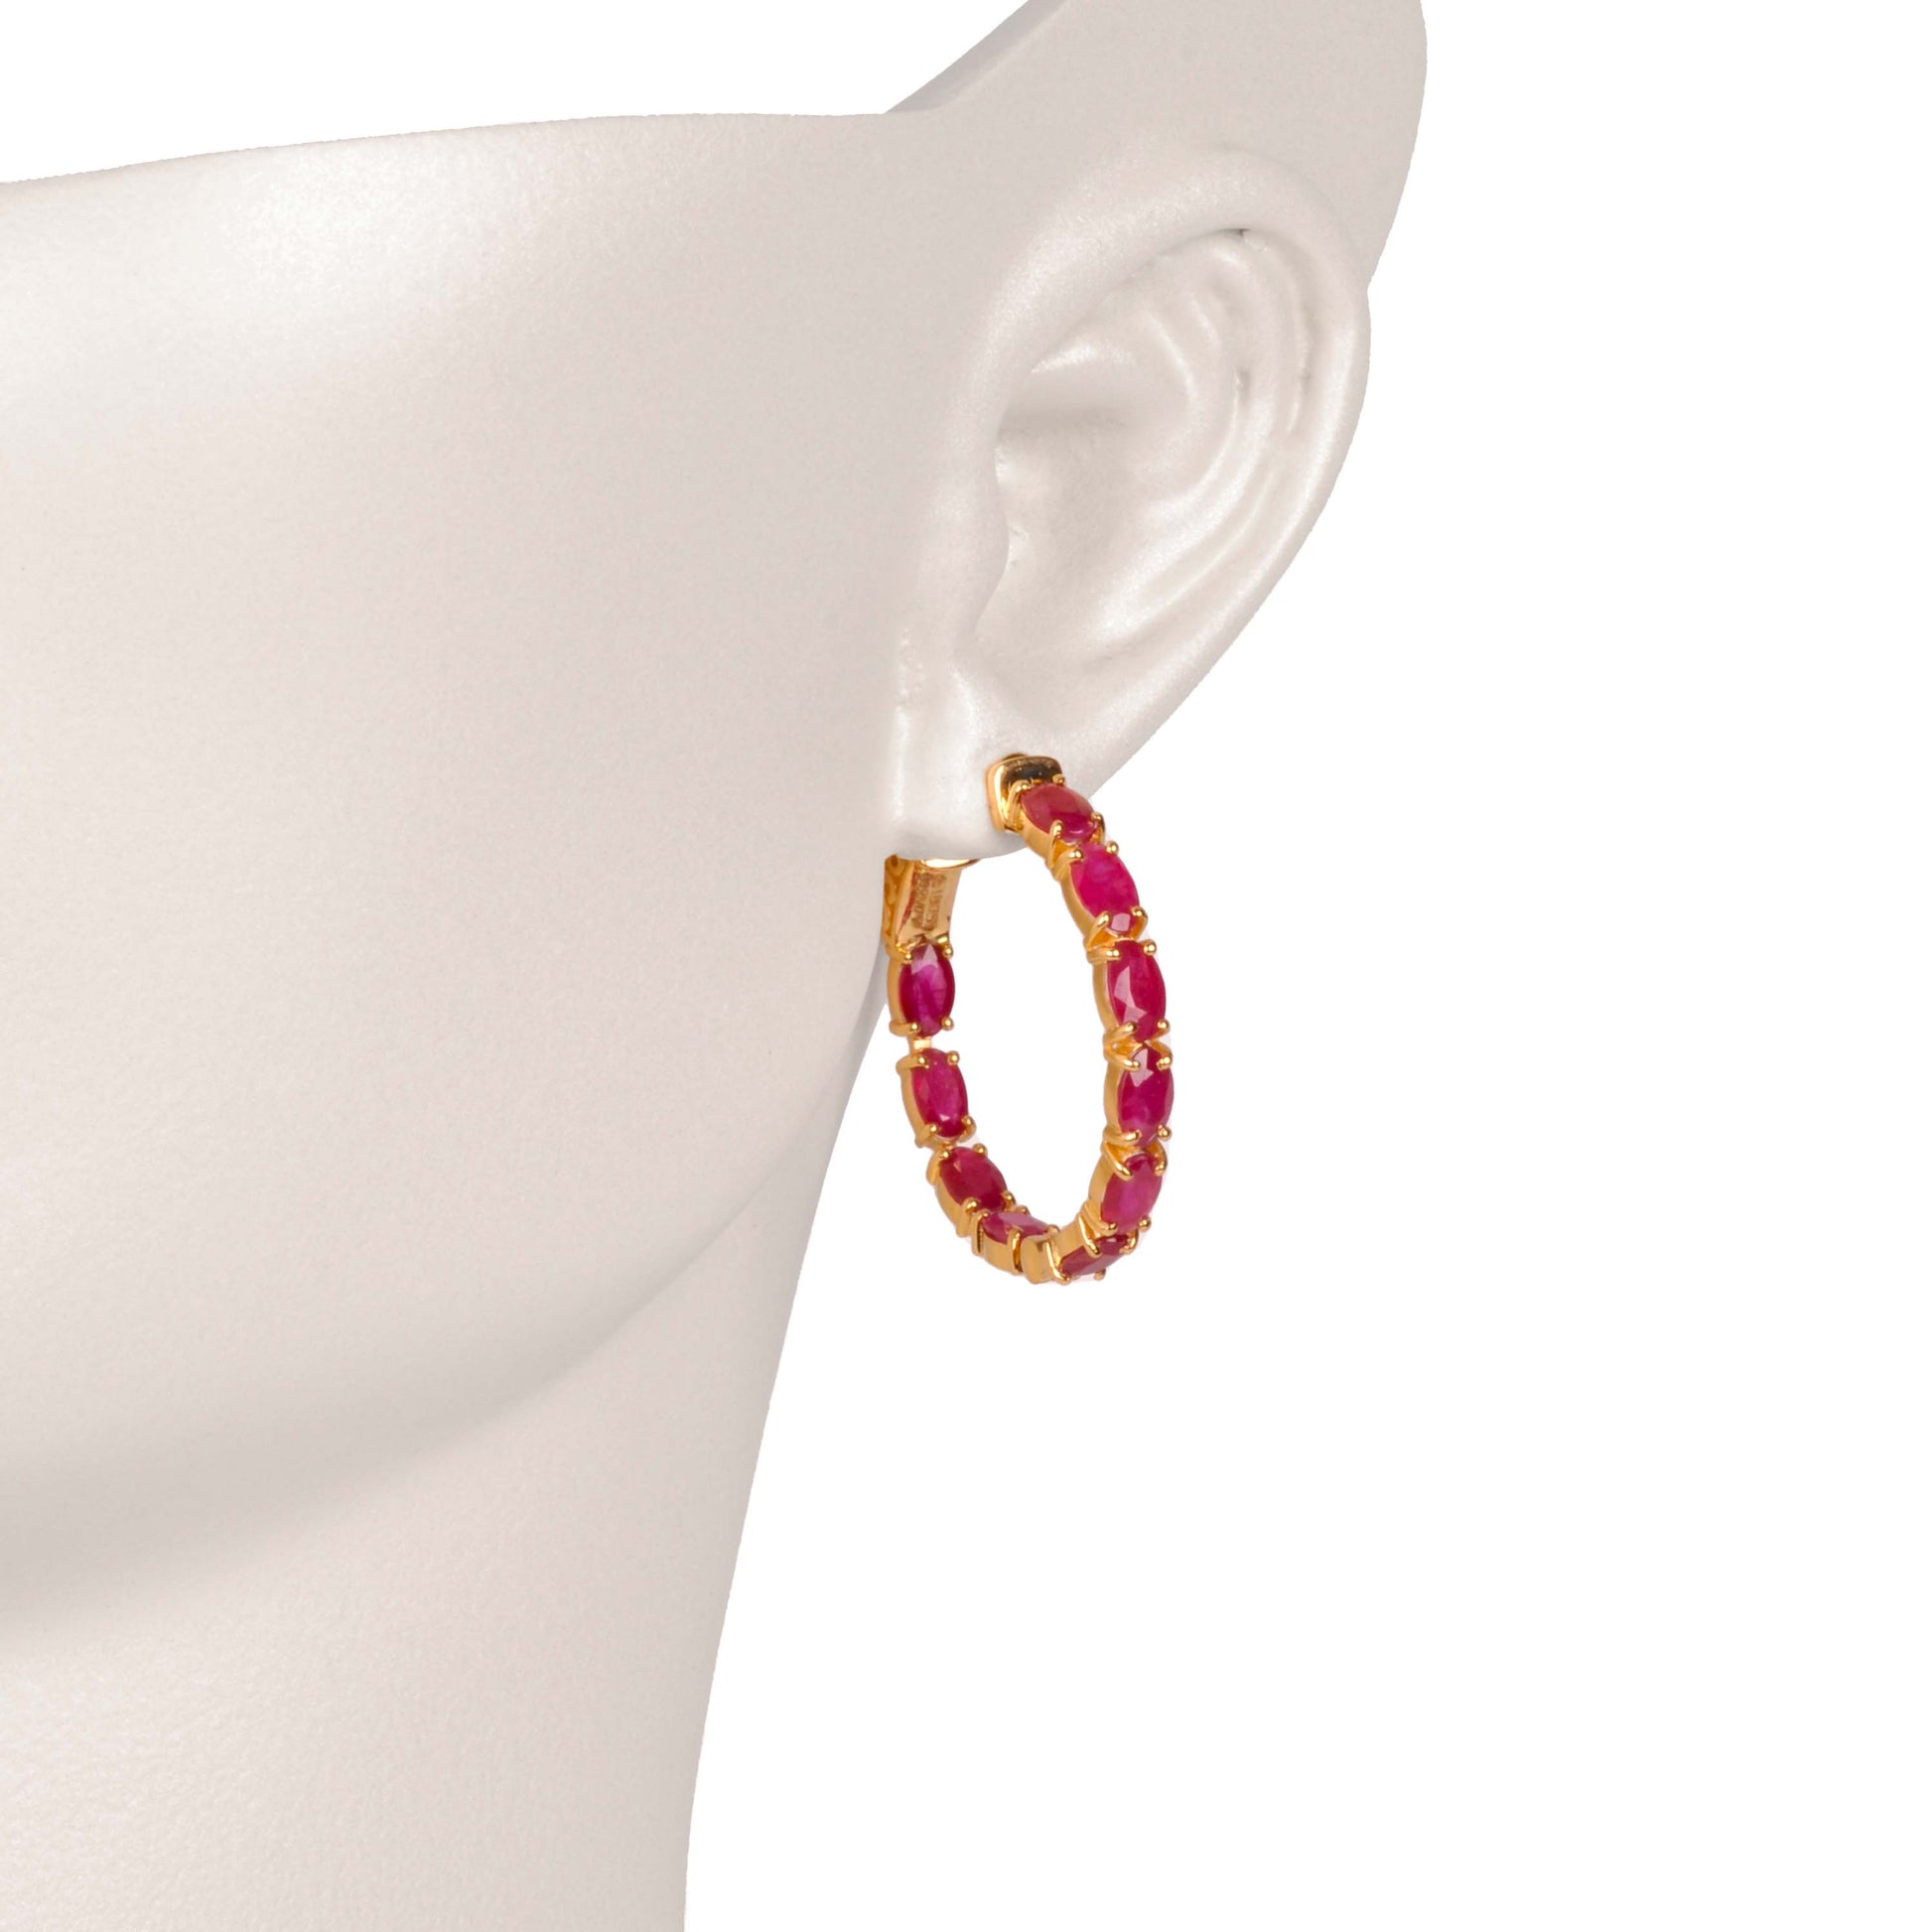 Classic Oval Hoop Earrings with Exquisite Red Stones